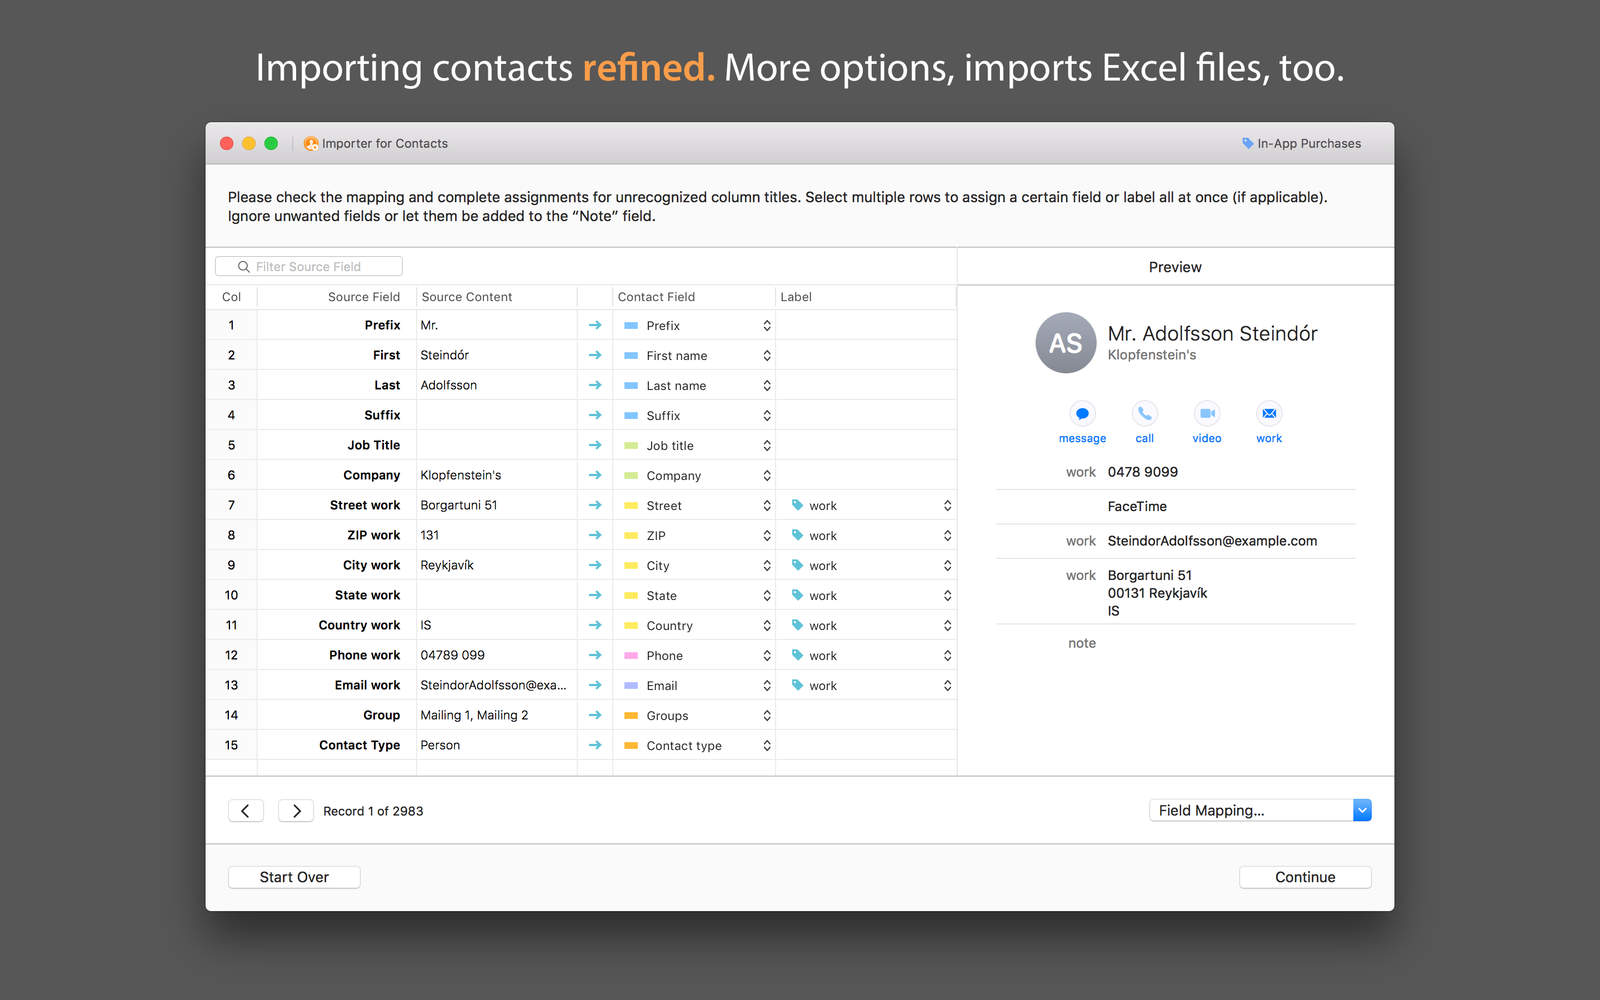 Importer for Contacts 1.0 : Main Window